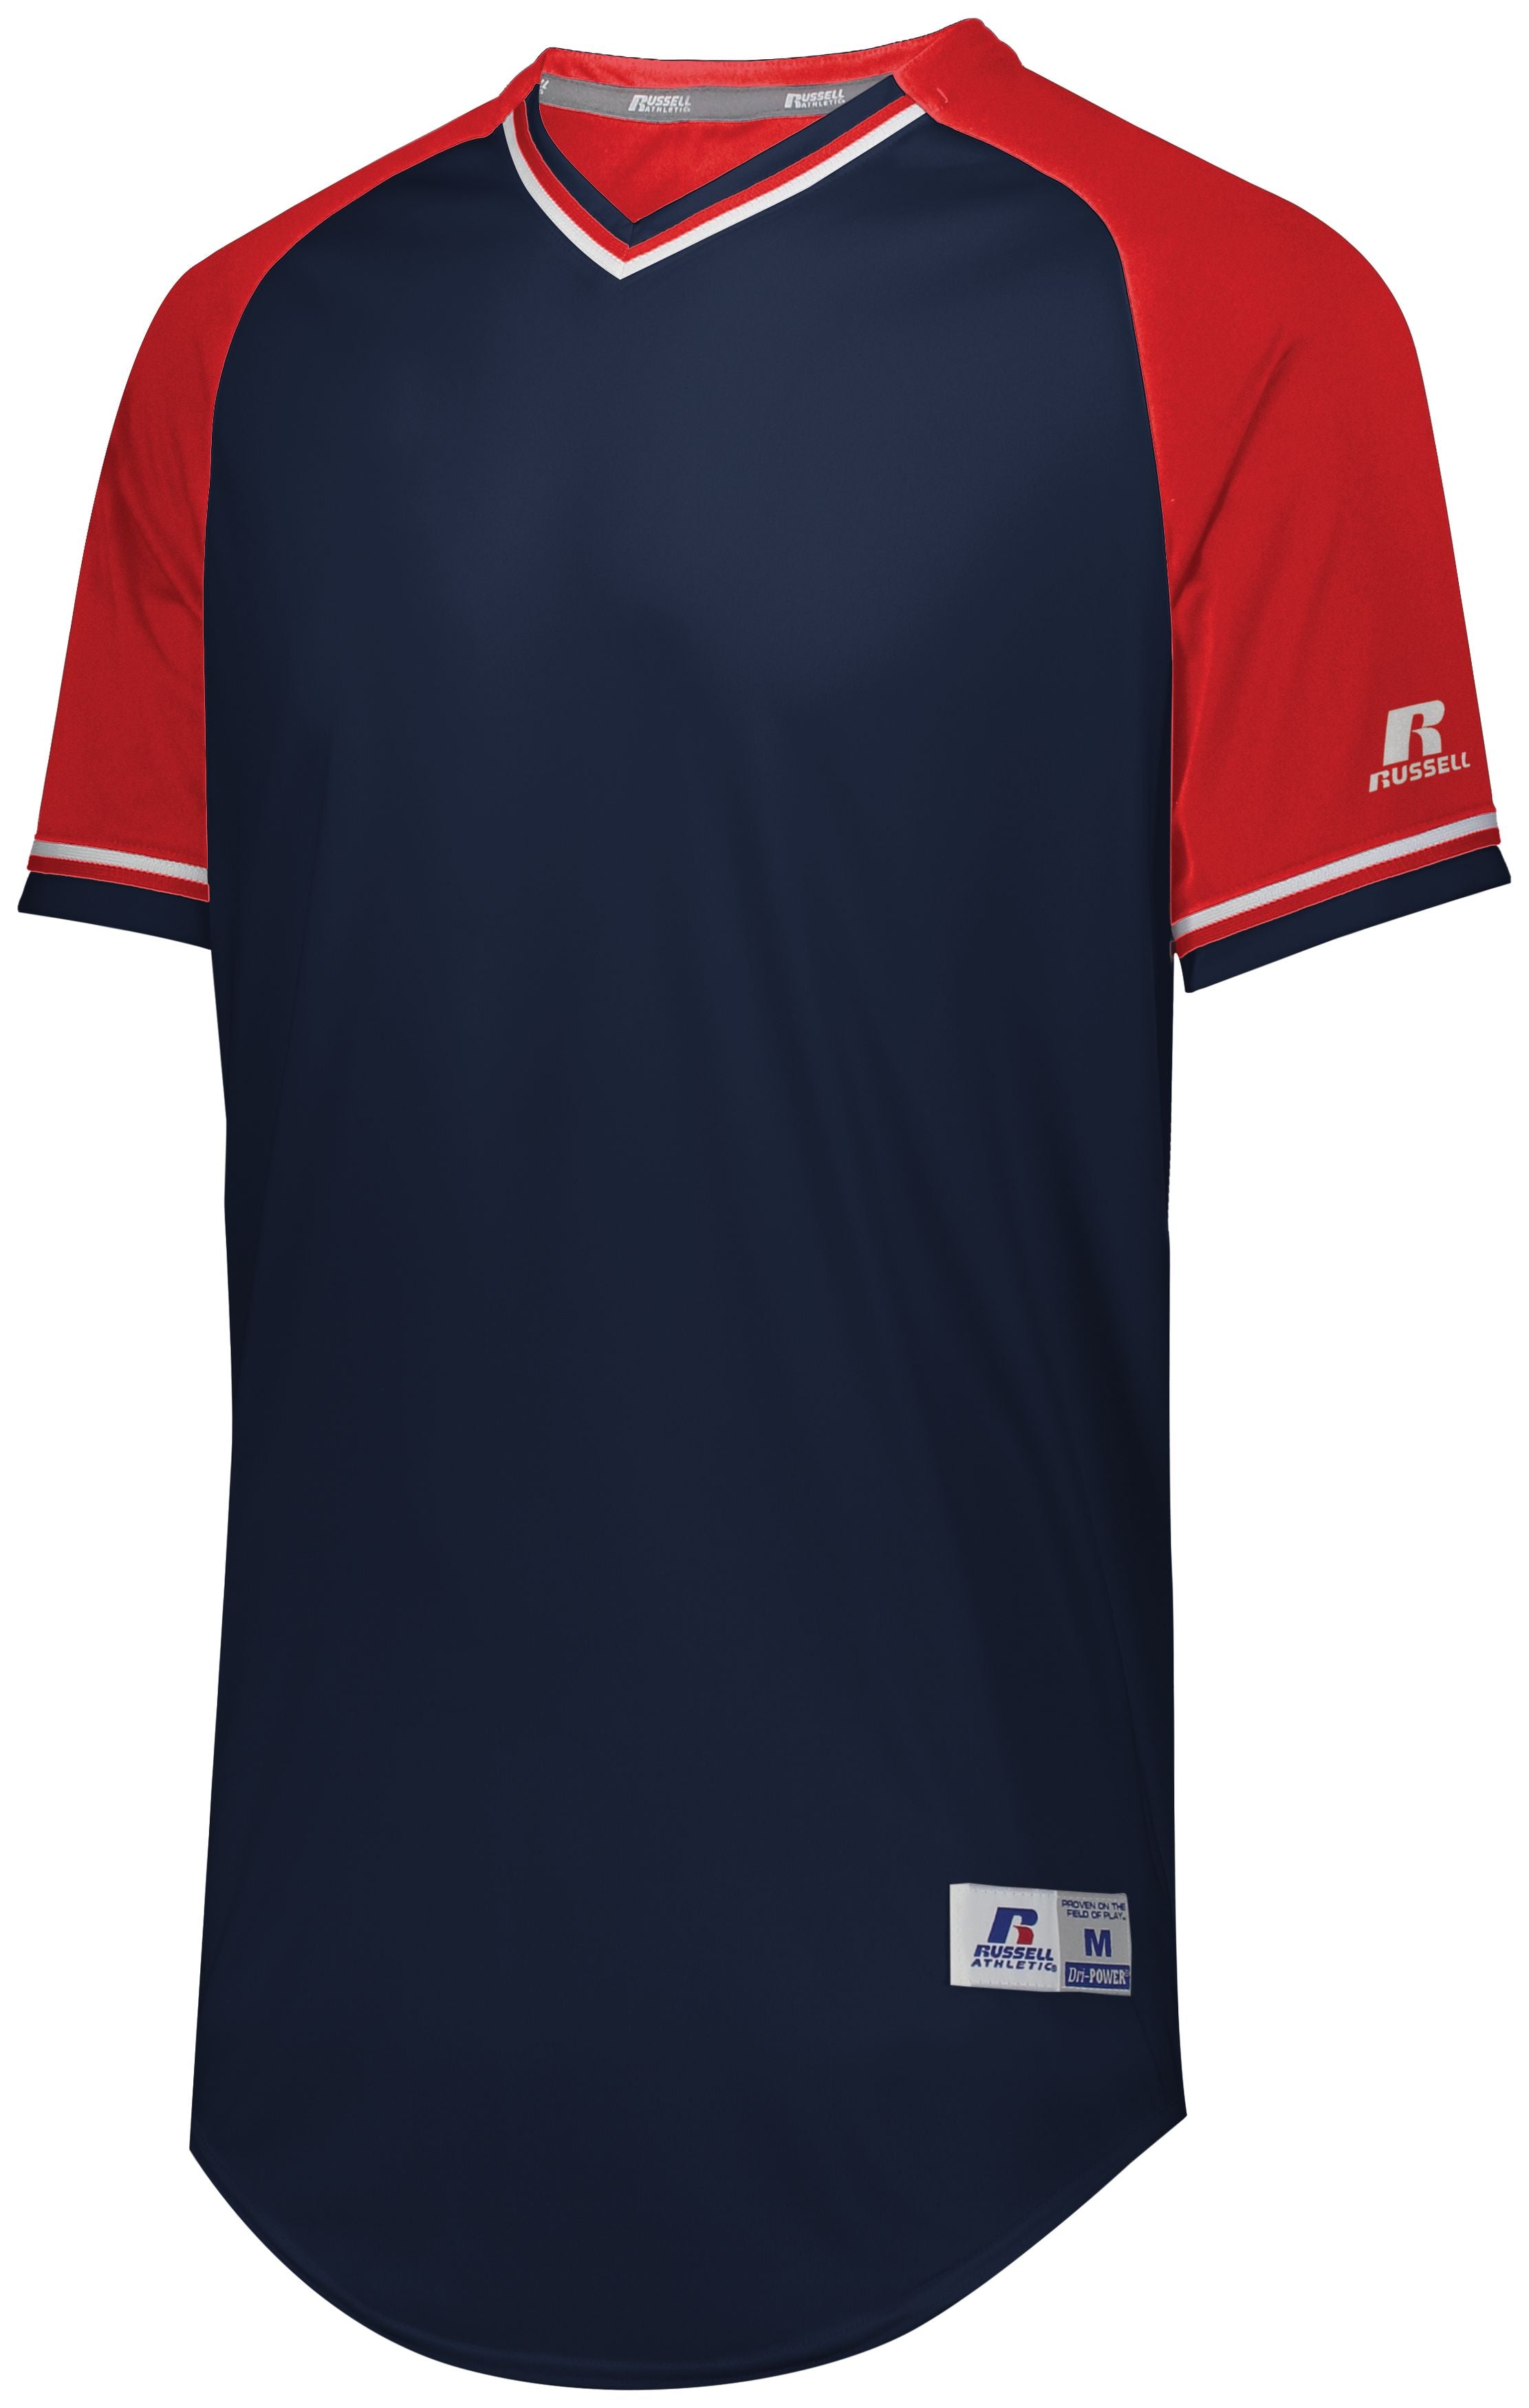 Russell Athletic Youth Classic V-Neck Jersey in Navy/True Red/White  -Part of the Youth, Youth-Jersey, Baseball, Russell-Athletic-Products, Shirts, All-Sports, All-Sports-1 product lines at KanaleyCreations.com